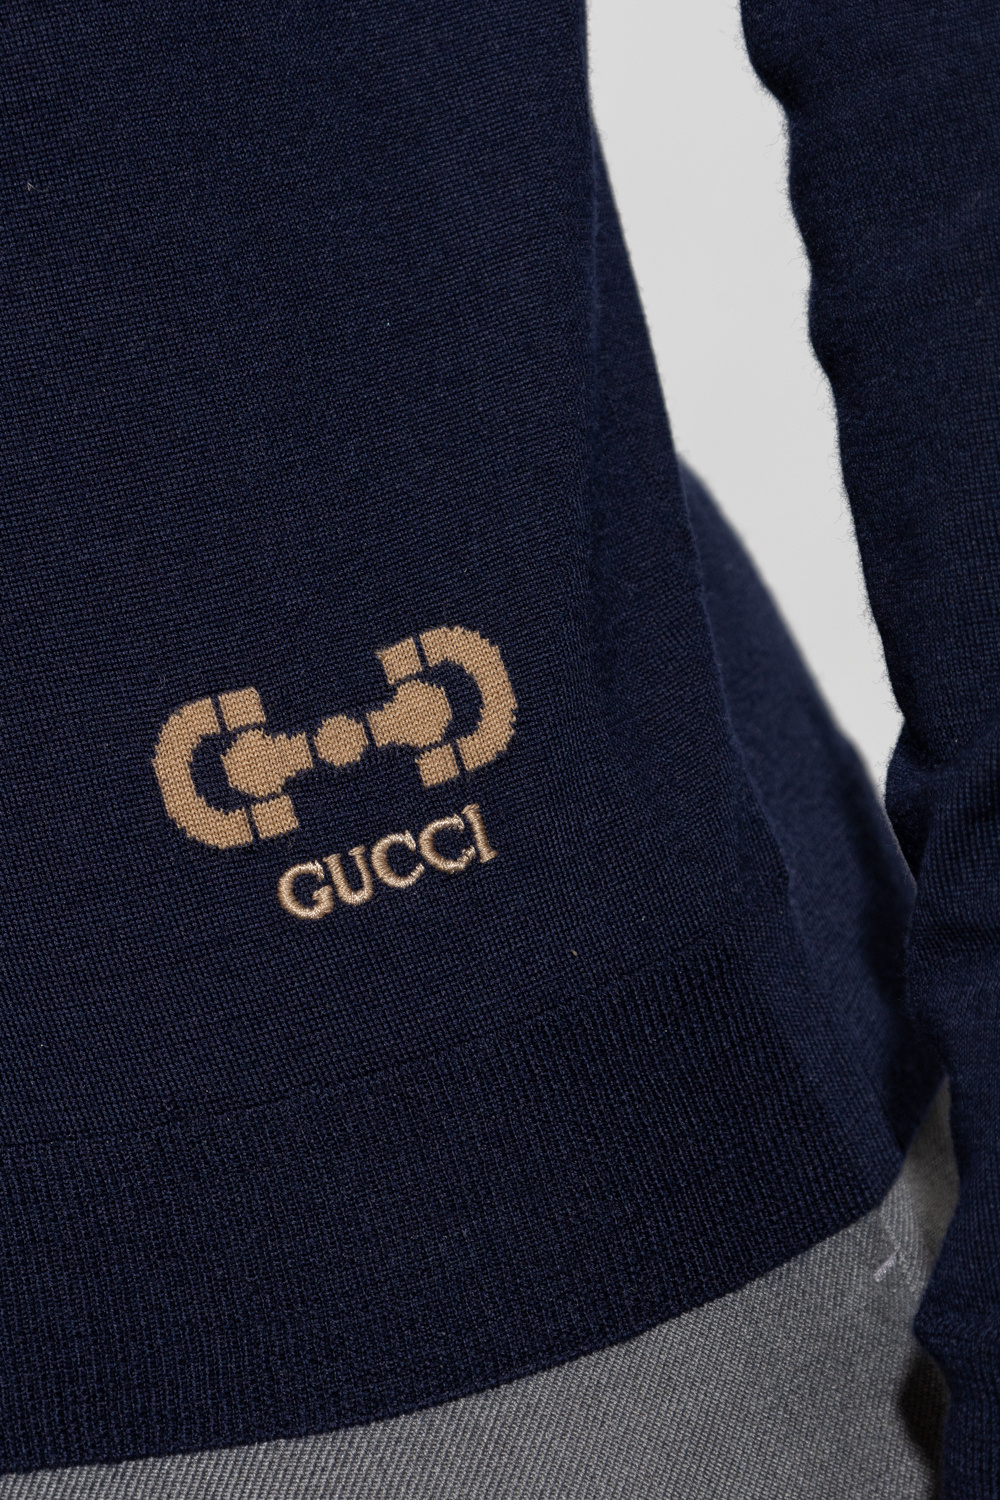 Gucci A Gucci Collaboration With Is in the Works